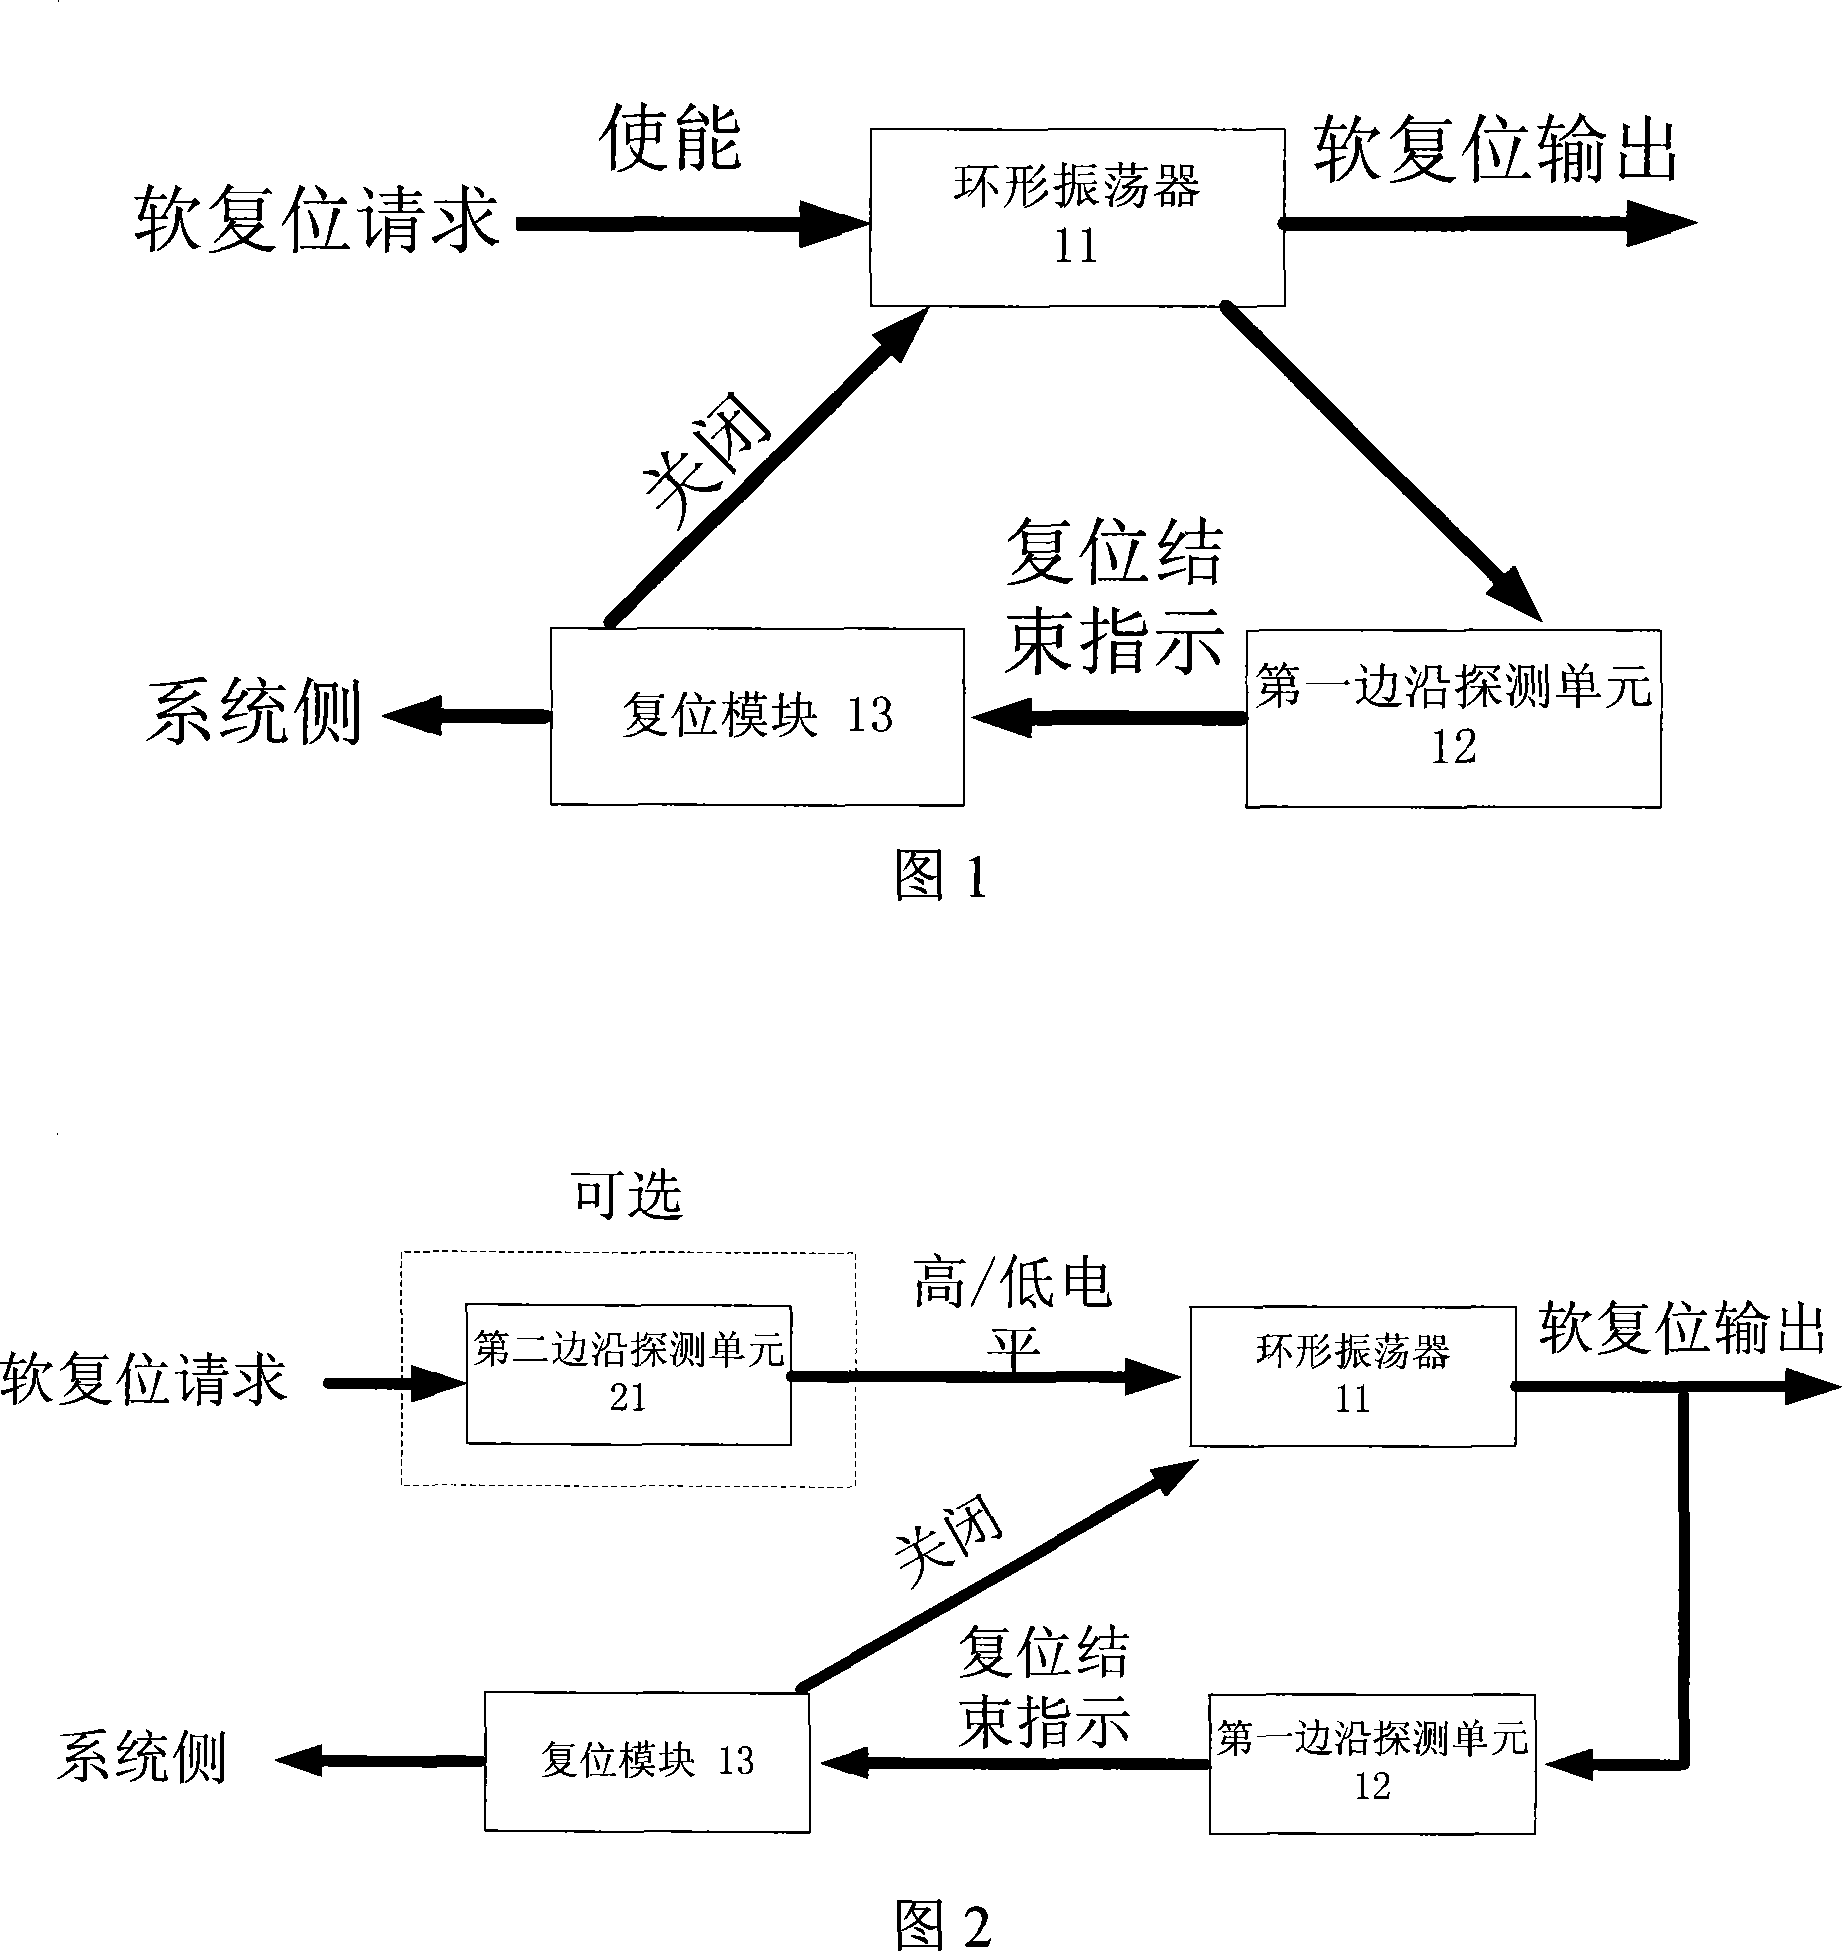 Soft reset device of integrated circuit chip